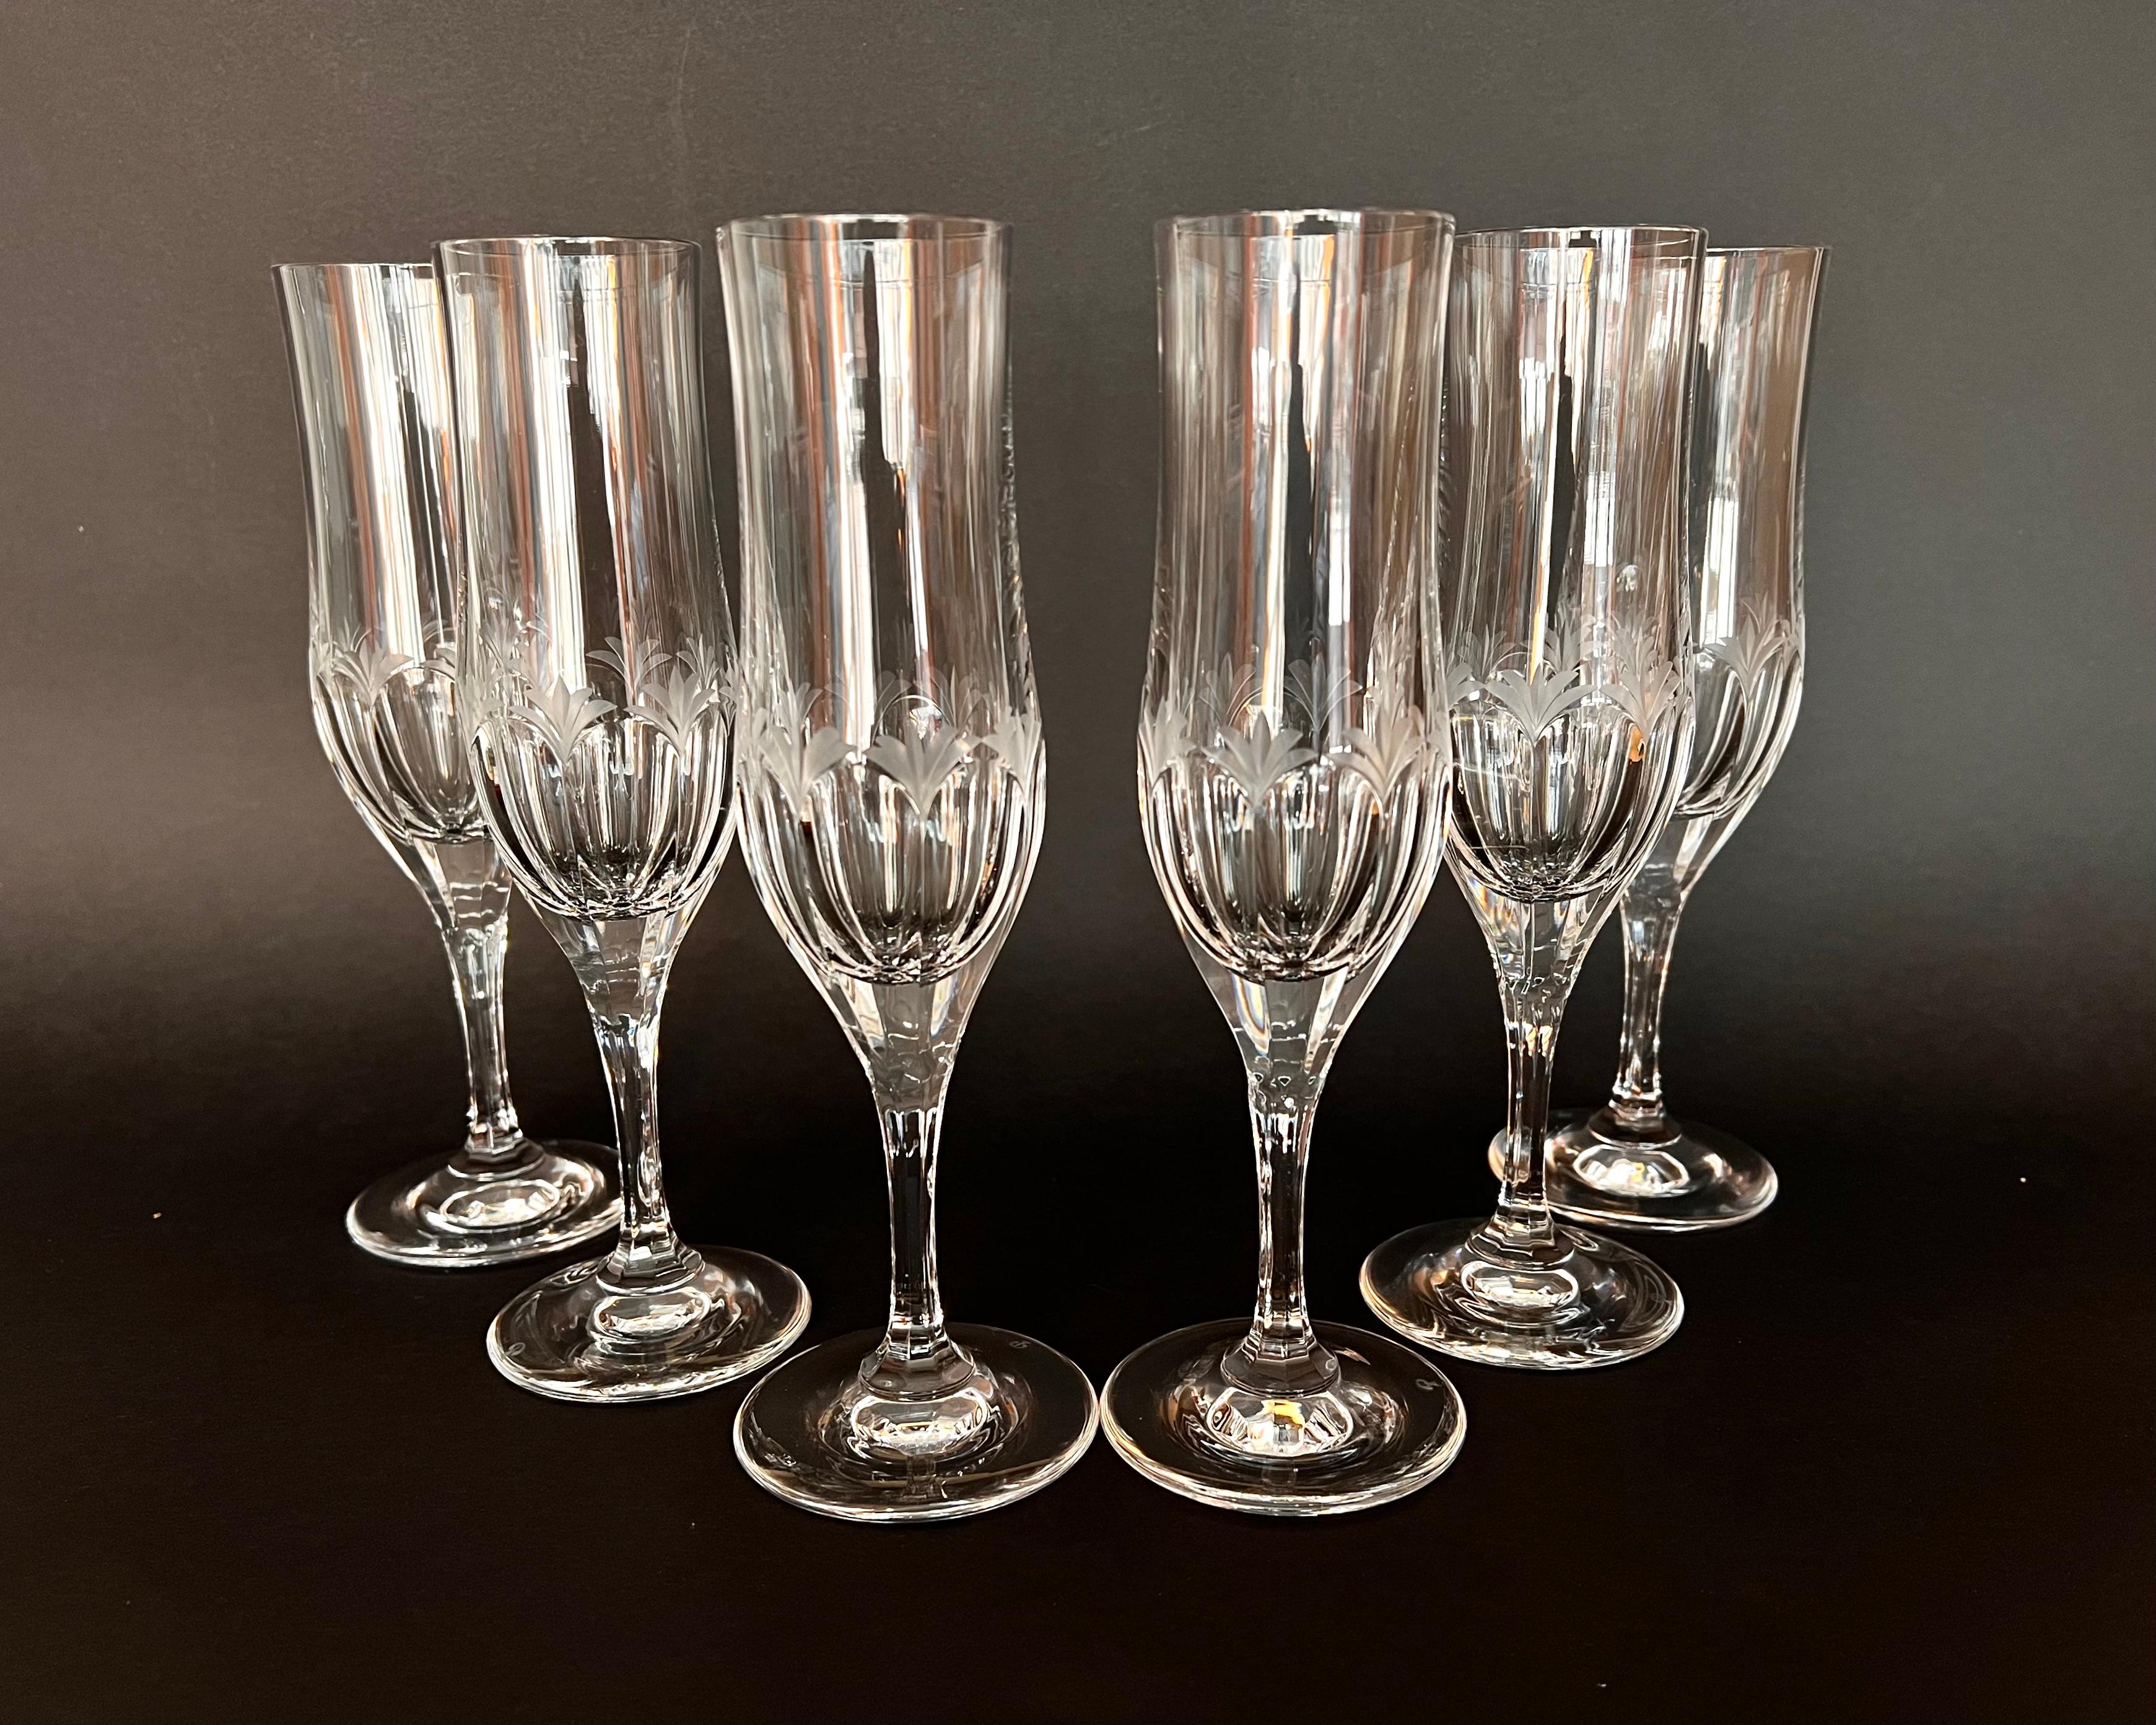 Late 20th Century Crystal Champagne Flute Glasses Set 6, Germany, 1980s Vintage Flute Glasses